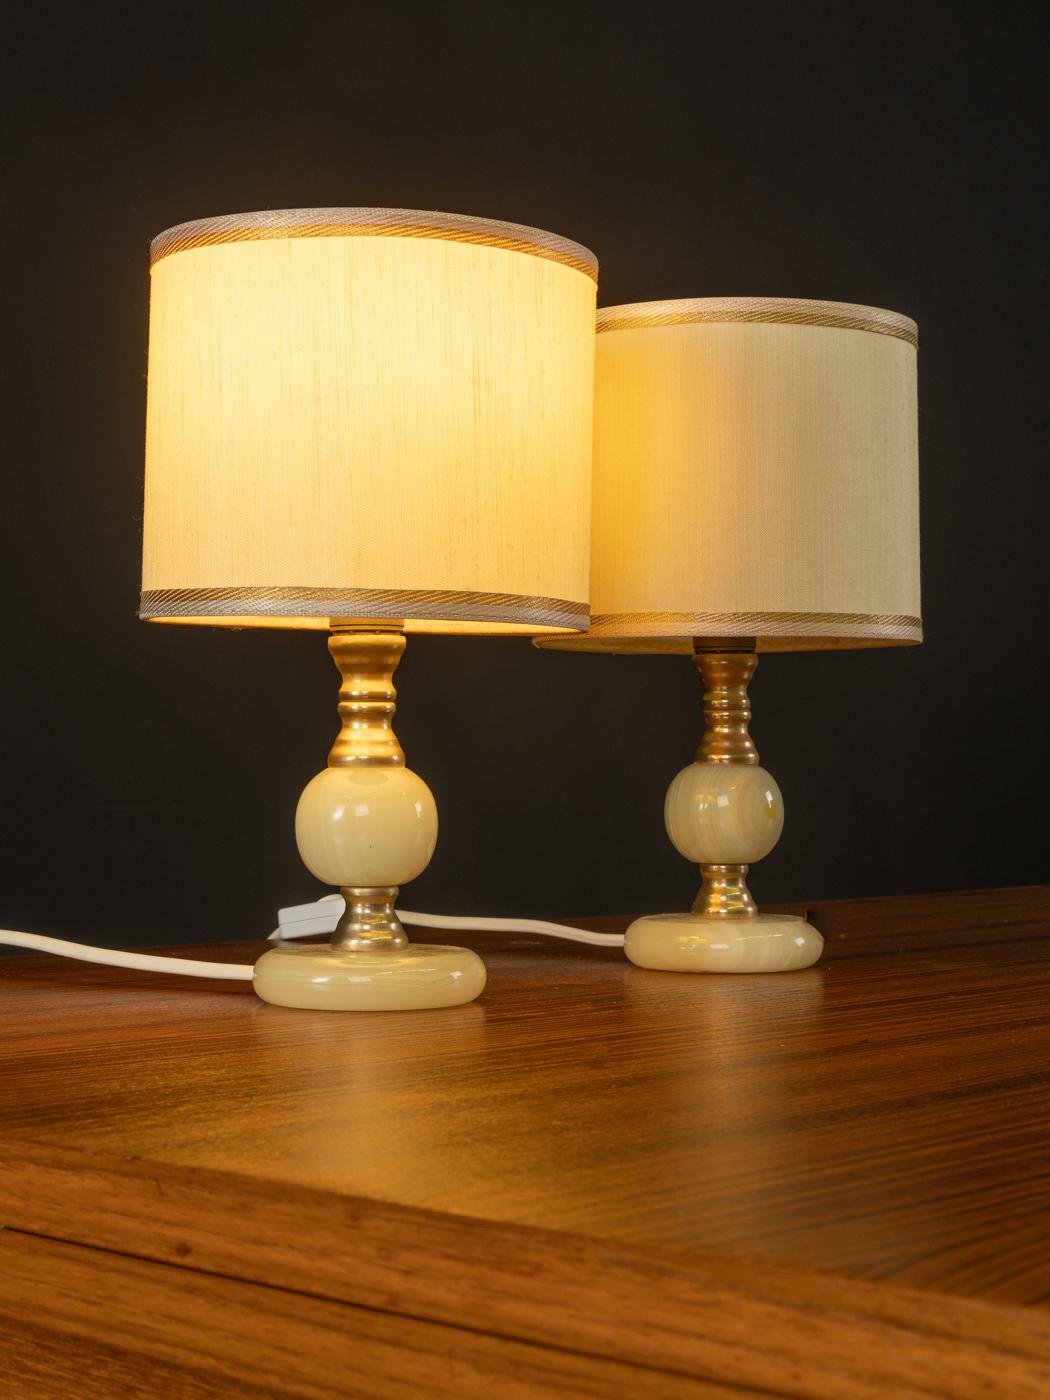 Beautiful bedside lamps from the 1960s. Cream white lampshade with onyxmarble and brass base. Made in Germany.